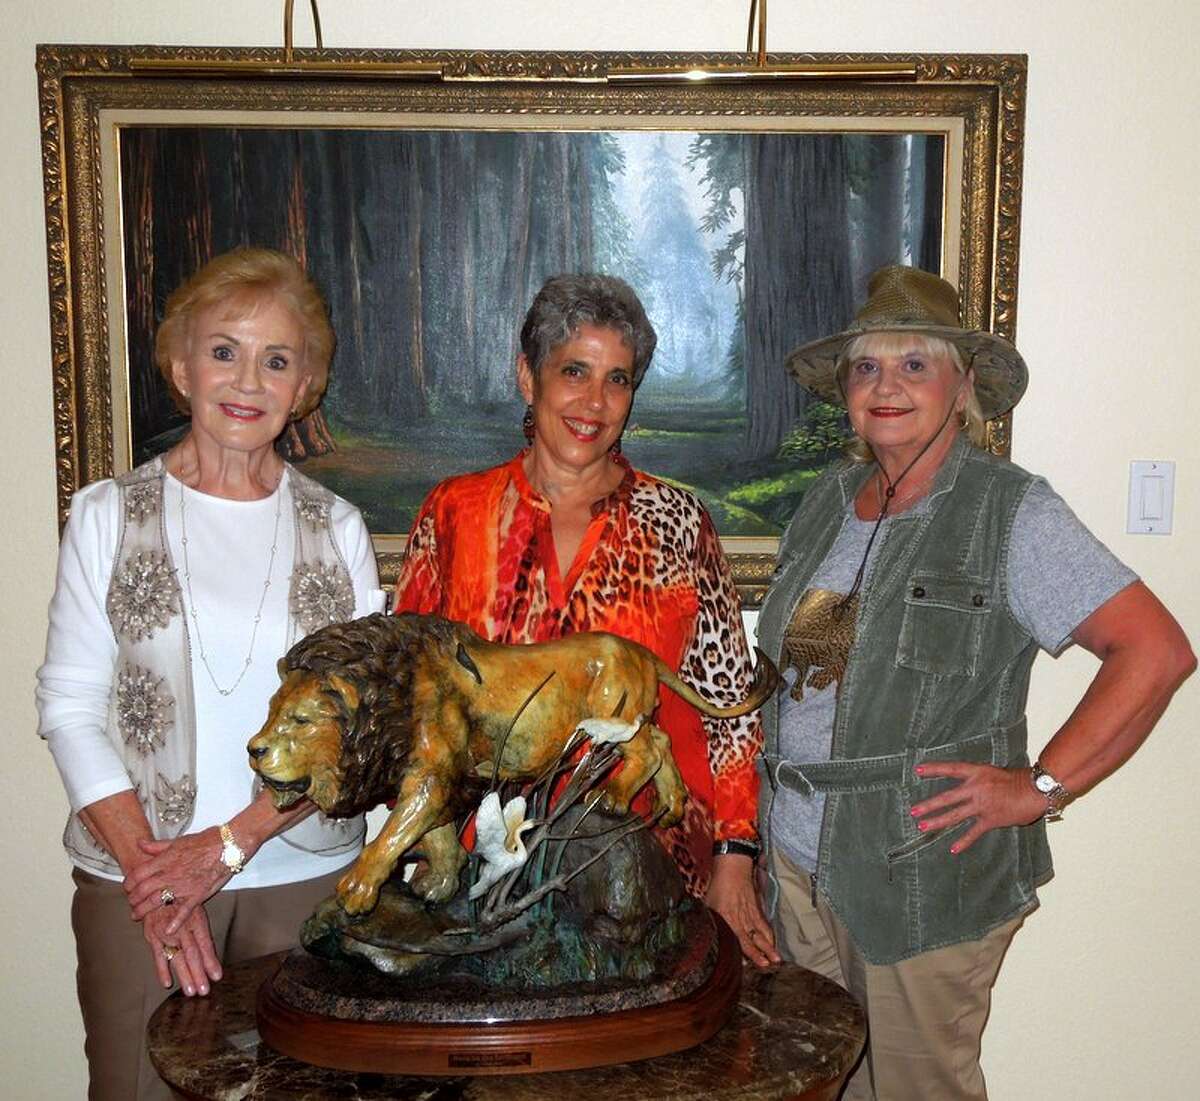 The Fort Bend Friends and Neighbors Social Club will host its Safari -- Out of Africa luncheon at 10:30 a.m. Sept. 16 at Sweetwater Country Club. Tickets are $30 for members and $35 for guests. Guests will learn more about club activities. Guest speaker is Betty Wasicek, a veteran traveler and nature photographer. She has traveled to Africa many times and will share her photographs of the people and wildlife of Africa. Email vpluncheons@fbfn.org or go to www.fbfn.org for details. From left are Wasicek, Jan Poscovsky, FBFN president, and Monica Lehrer, FBFN VP Luncheons.